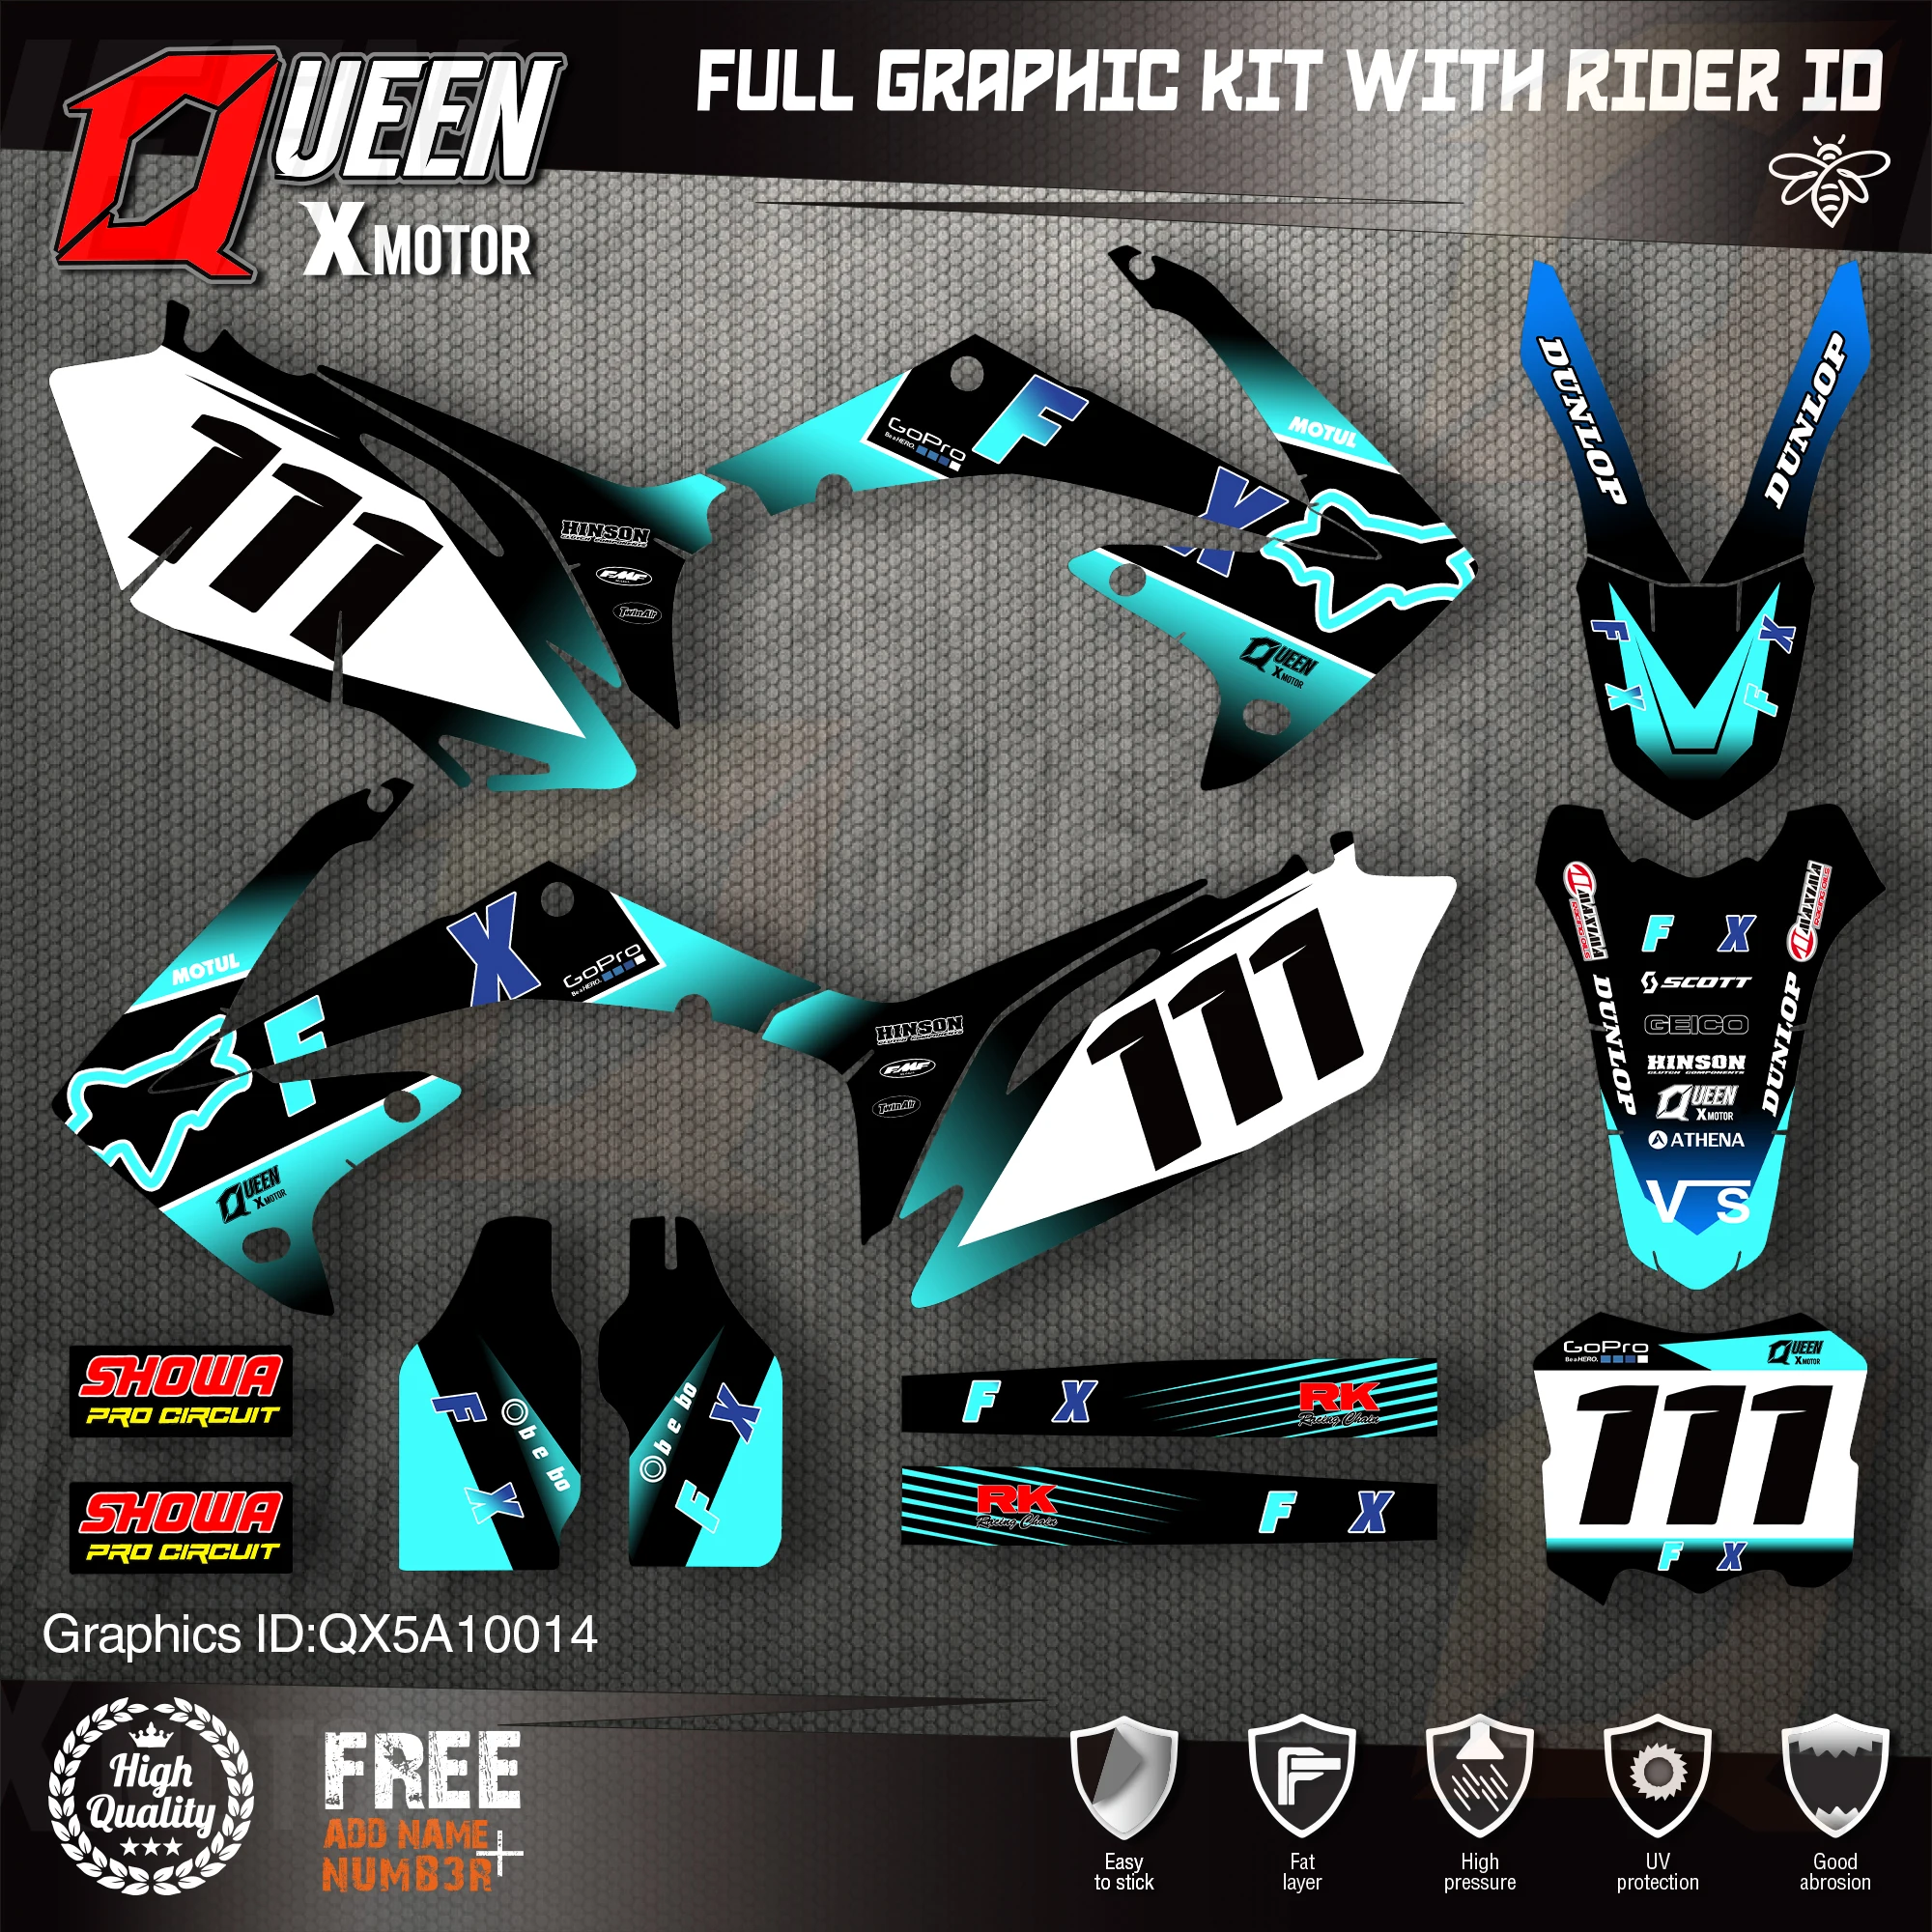 

QUEEN X MOTOR Custom Team Graphics Backgrounds Decals Stickers Kit For HONDA 2010 2011 2012 2013 CRF250R 2009-2012 CRF450R 014